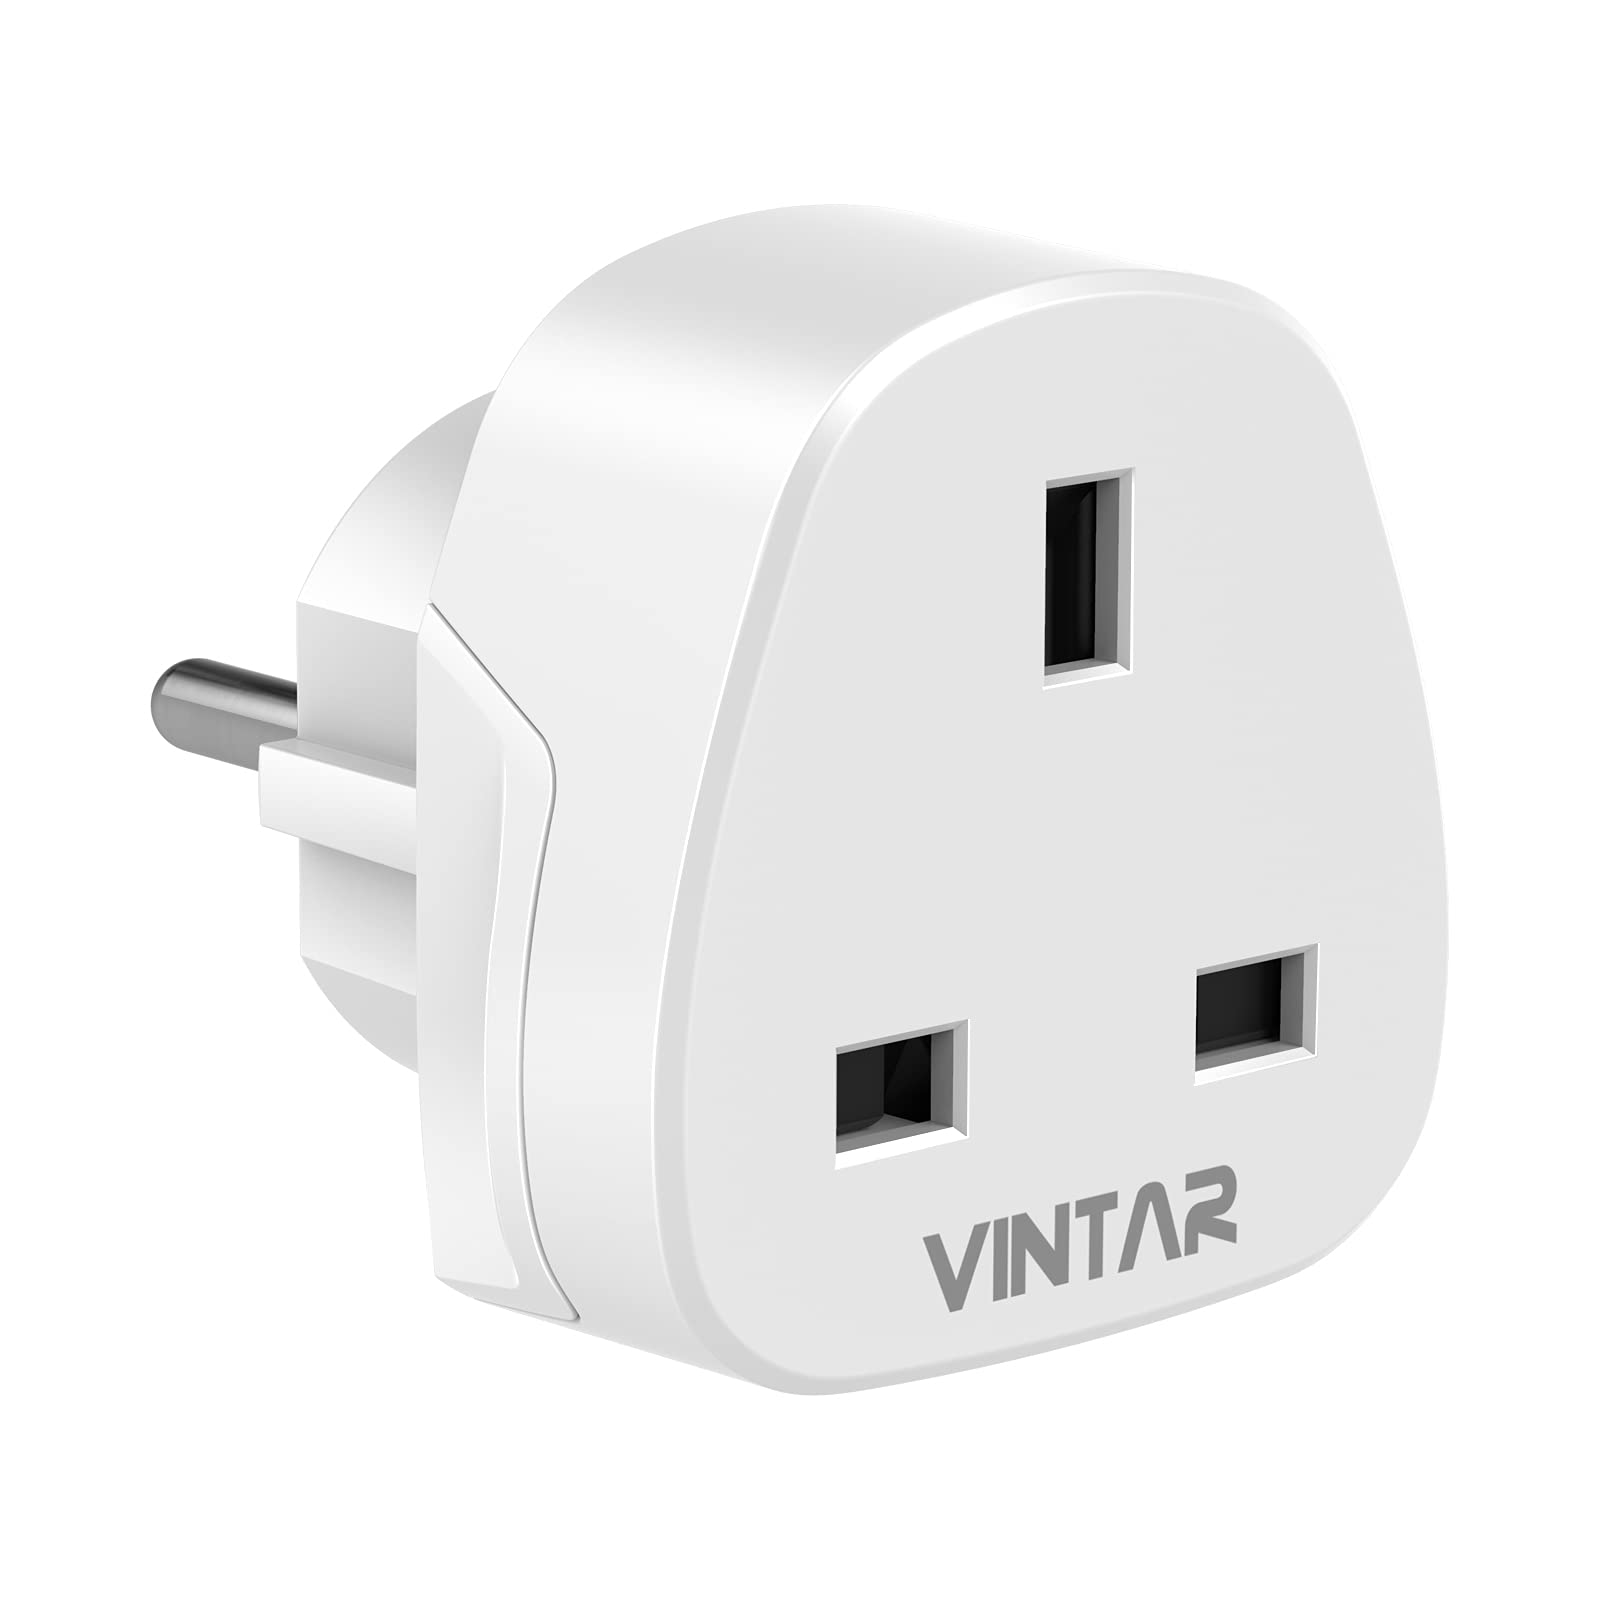 VINTAR UK to European Plug Adapter Round 3 Pin to 2 Pin Type G to Type C,E,F for Spain, France,Netherlands, Greece, Germany and Asia[1-packs]